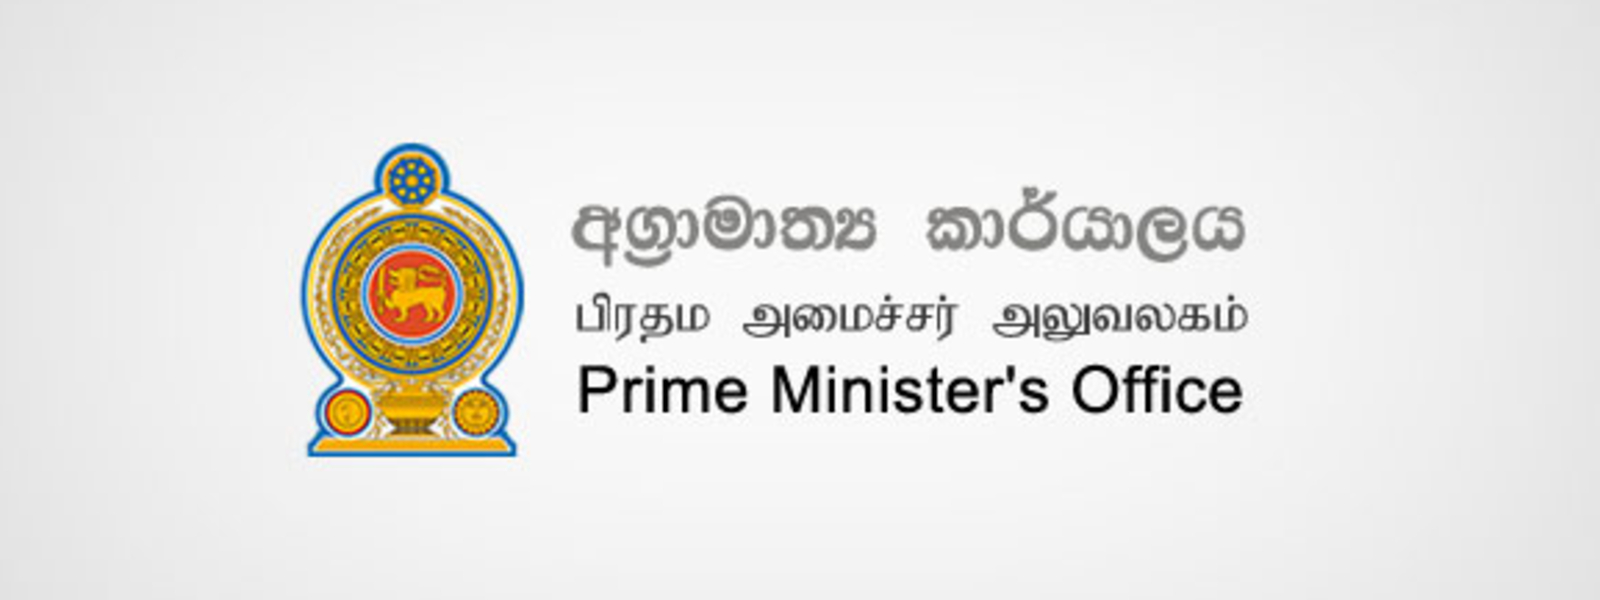 NO need to increase price of gas: Prime Minister